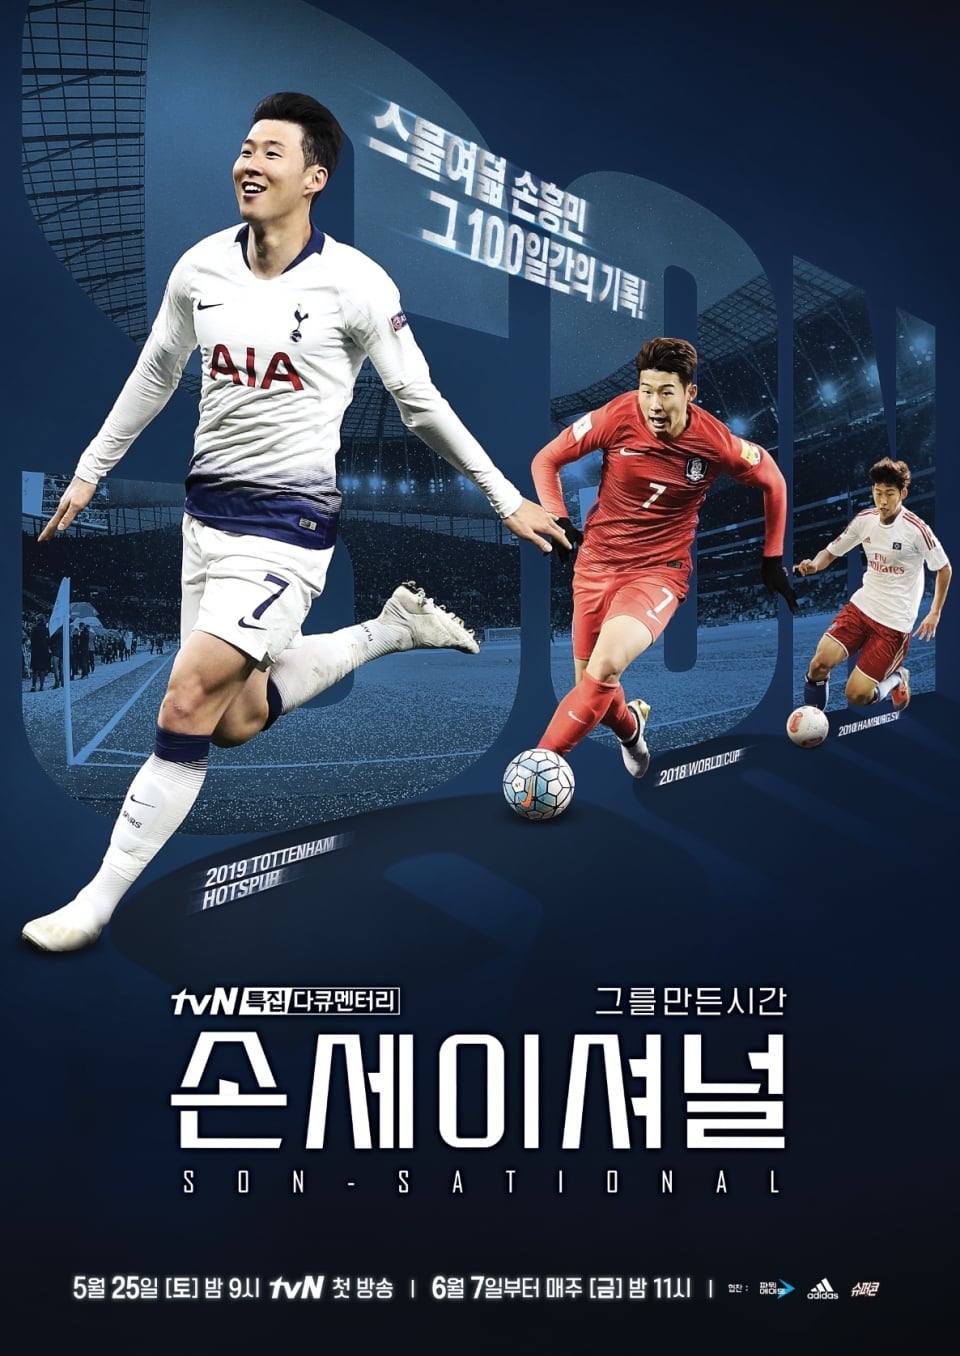 Sonsational: The Making of Son Heung-min